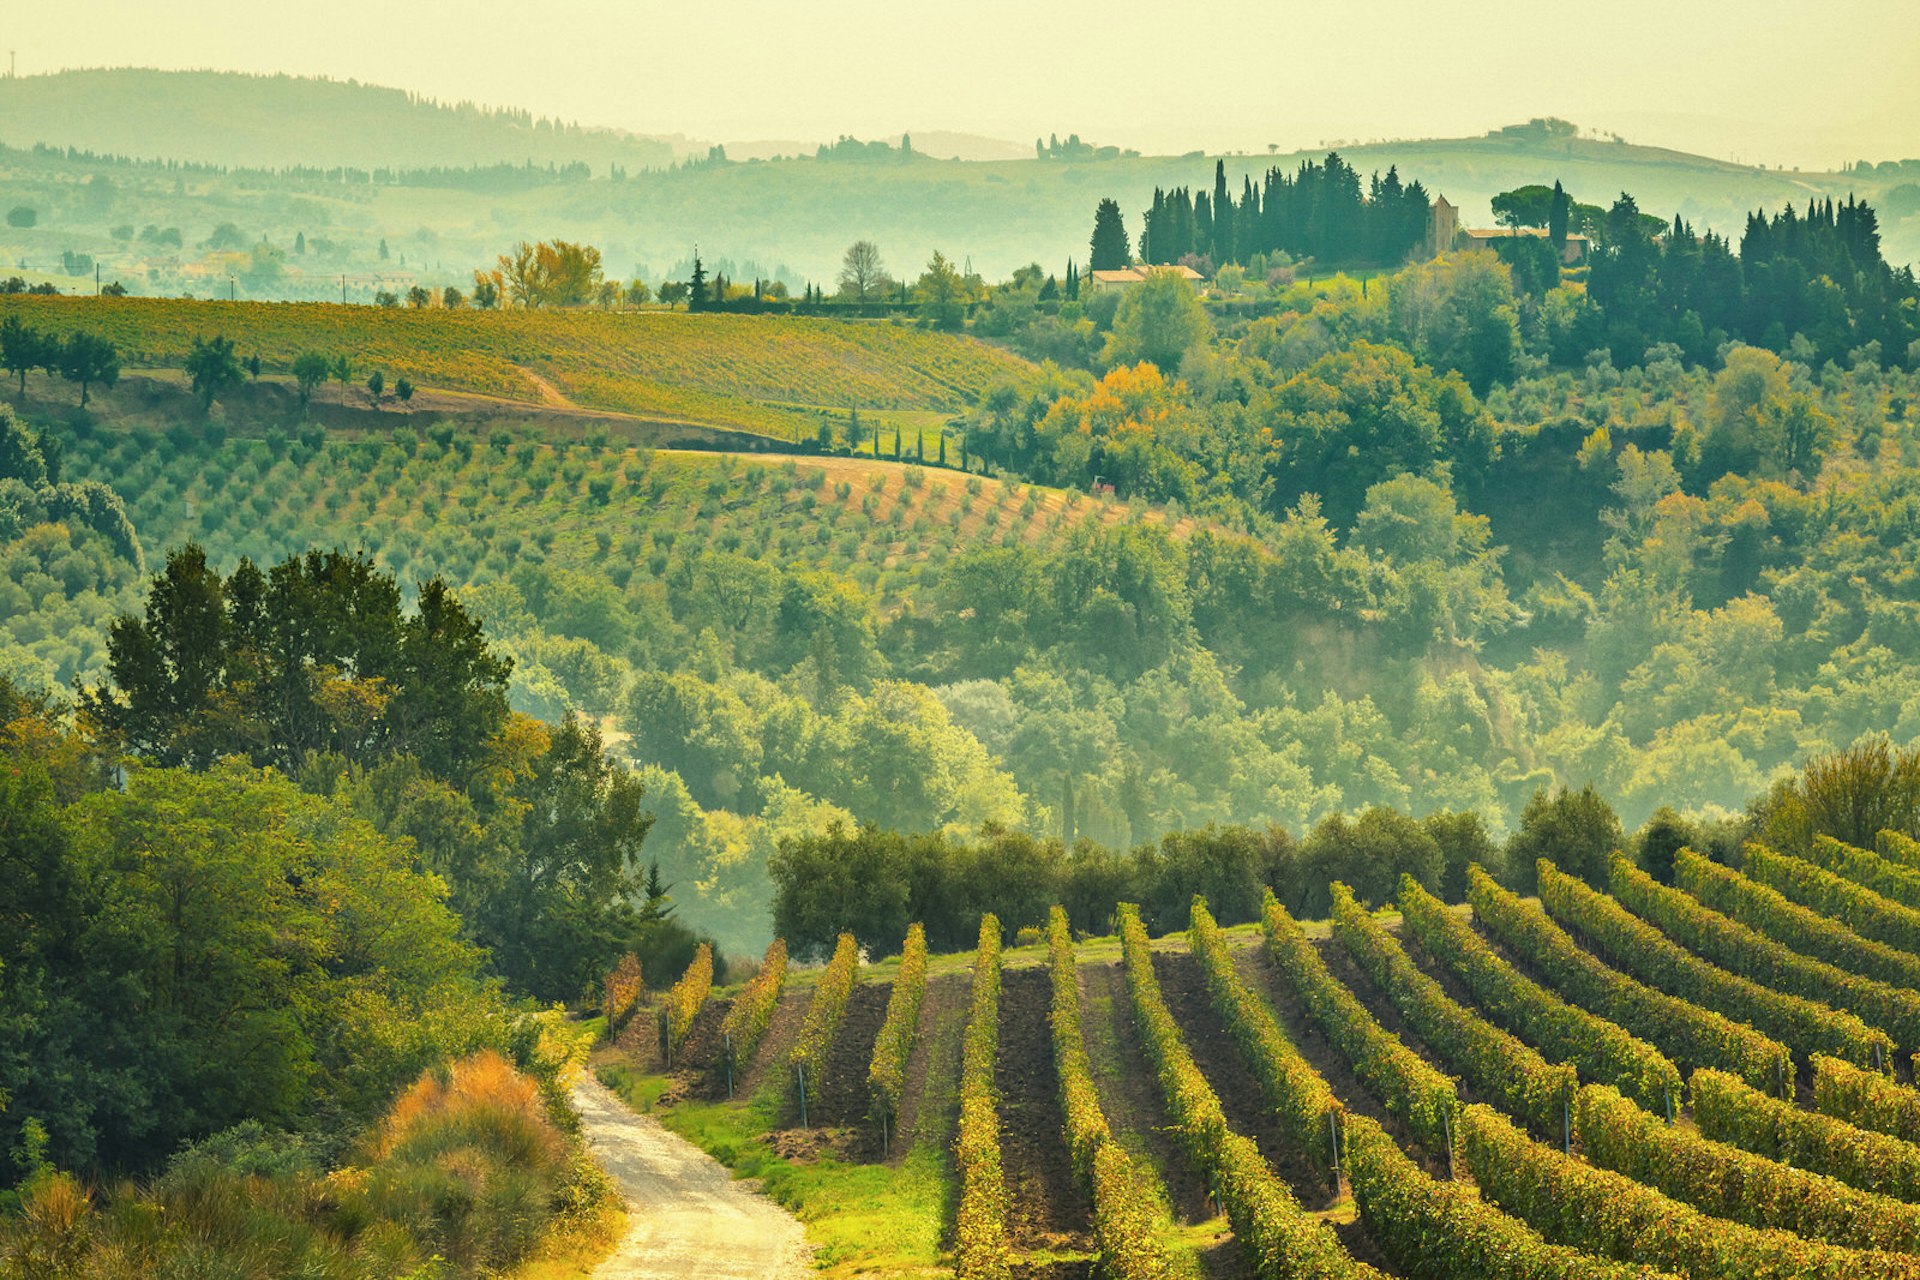 Features - Vineyards in the Chianti Region, Tuscany, Italy